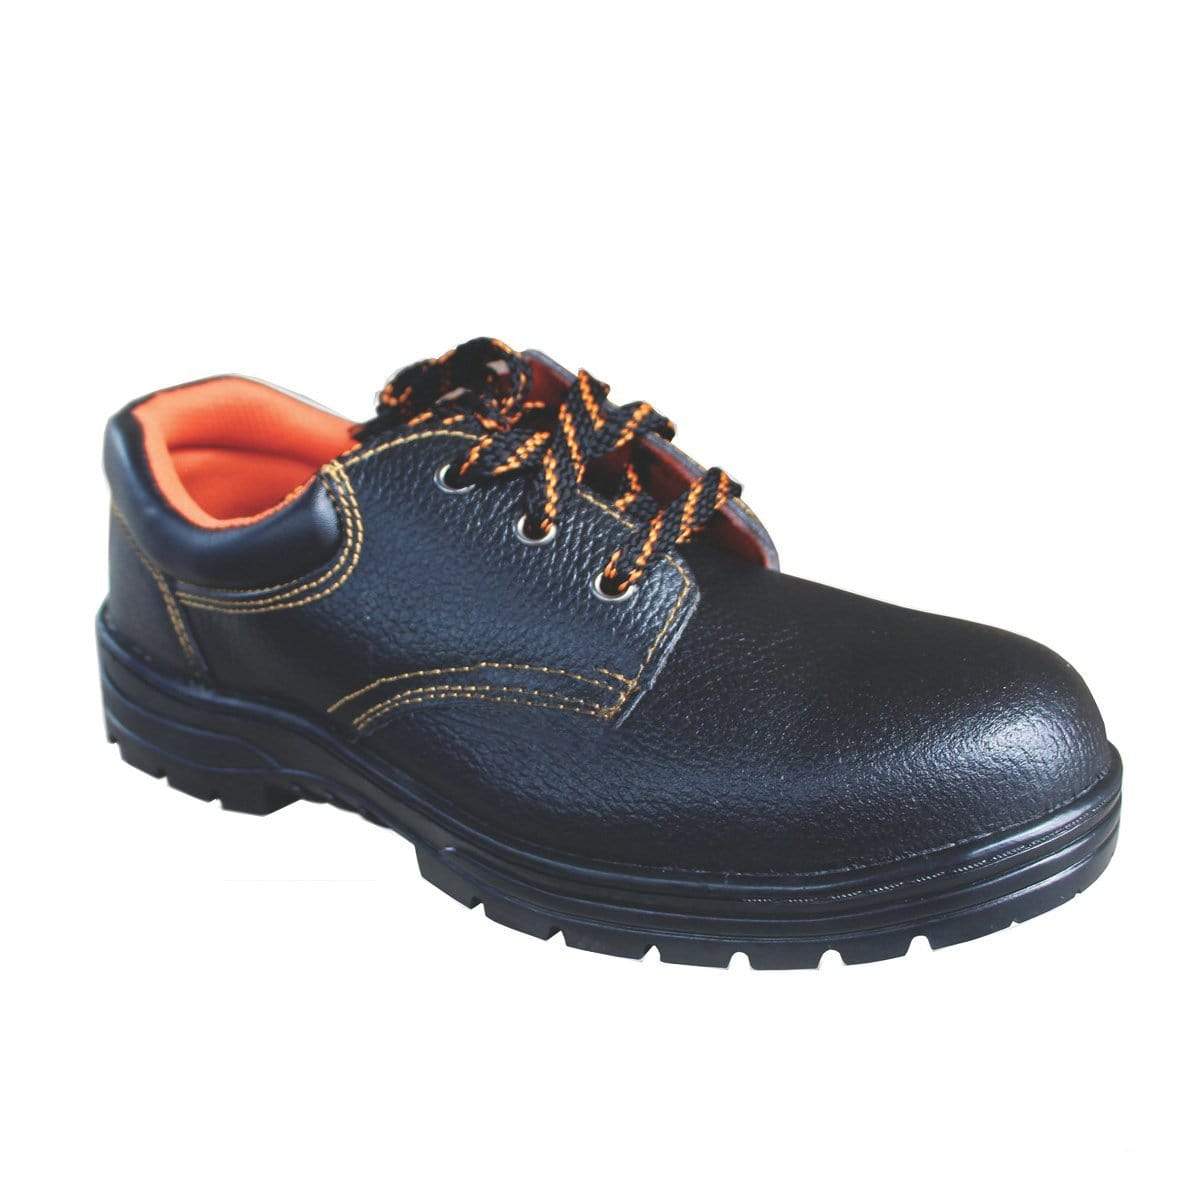 ANEKA Worker Safety Shoes Safety Boots Steel Toe Cap Kasut UK9 1000#